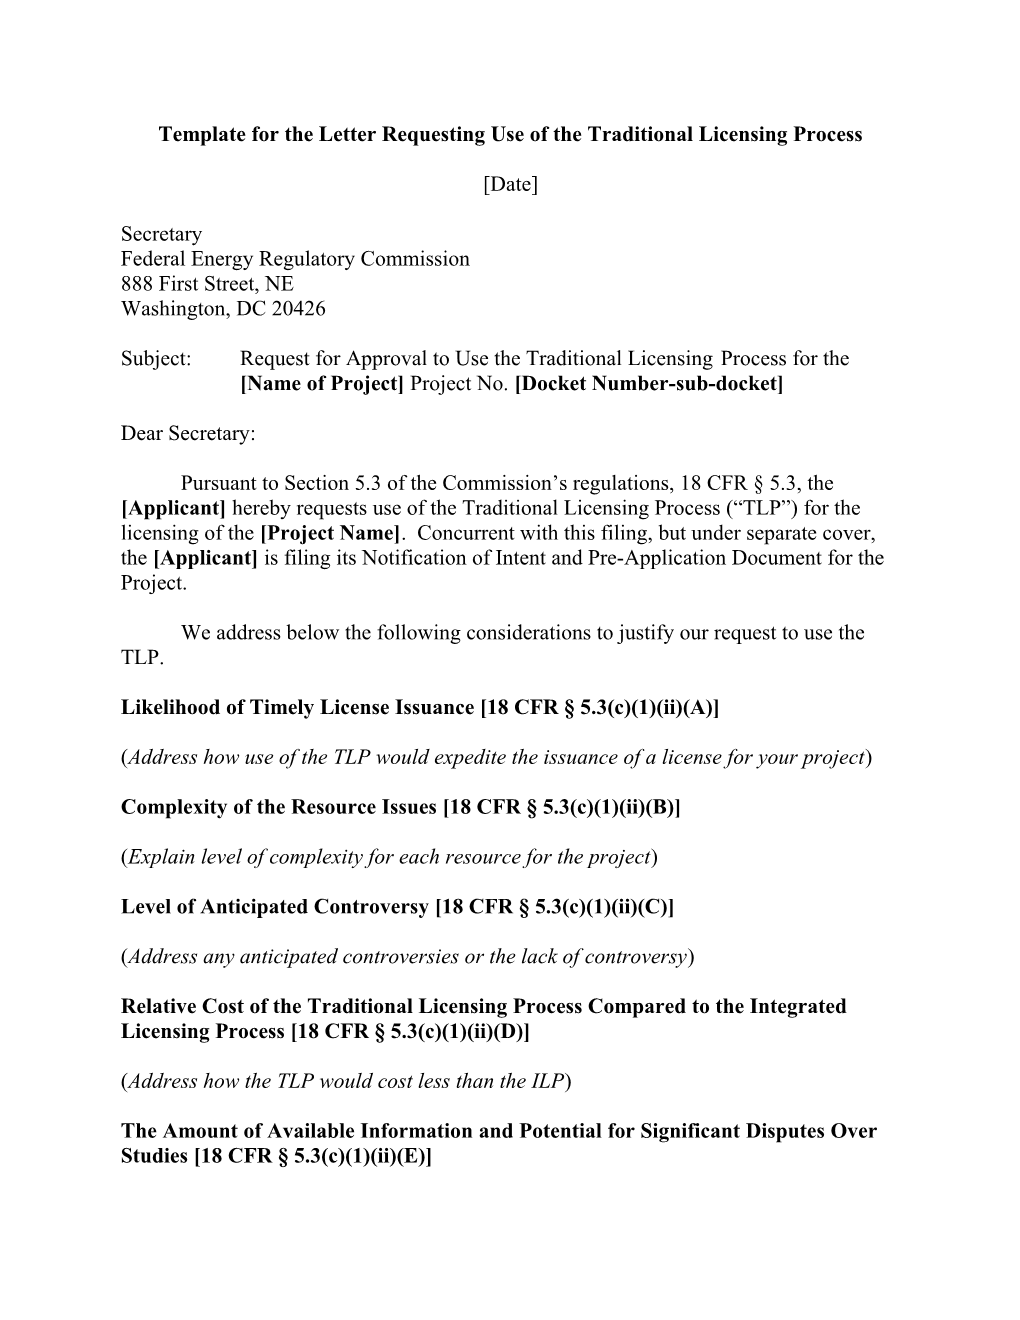 TLP Request - Template for the Letter Requesting Use of the Traditional Licensing Process